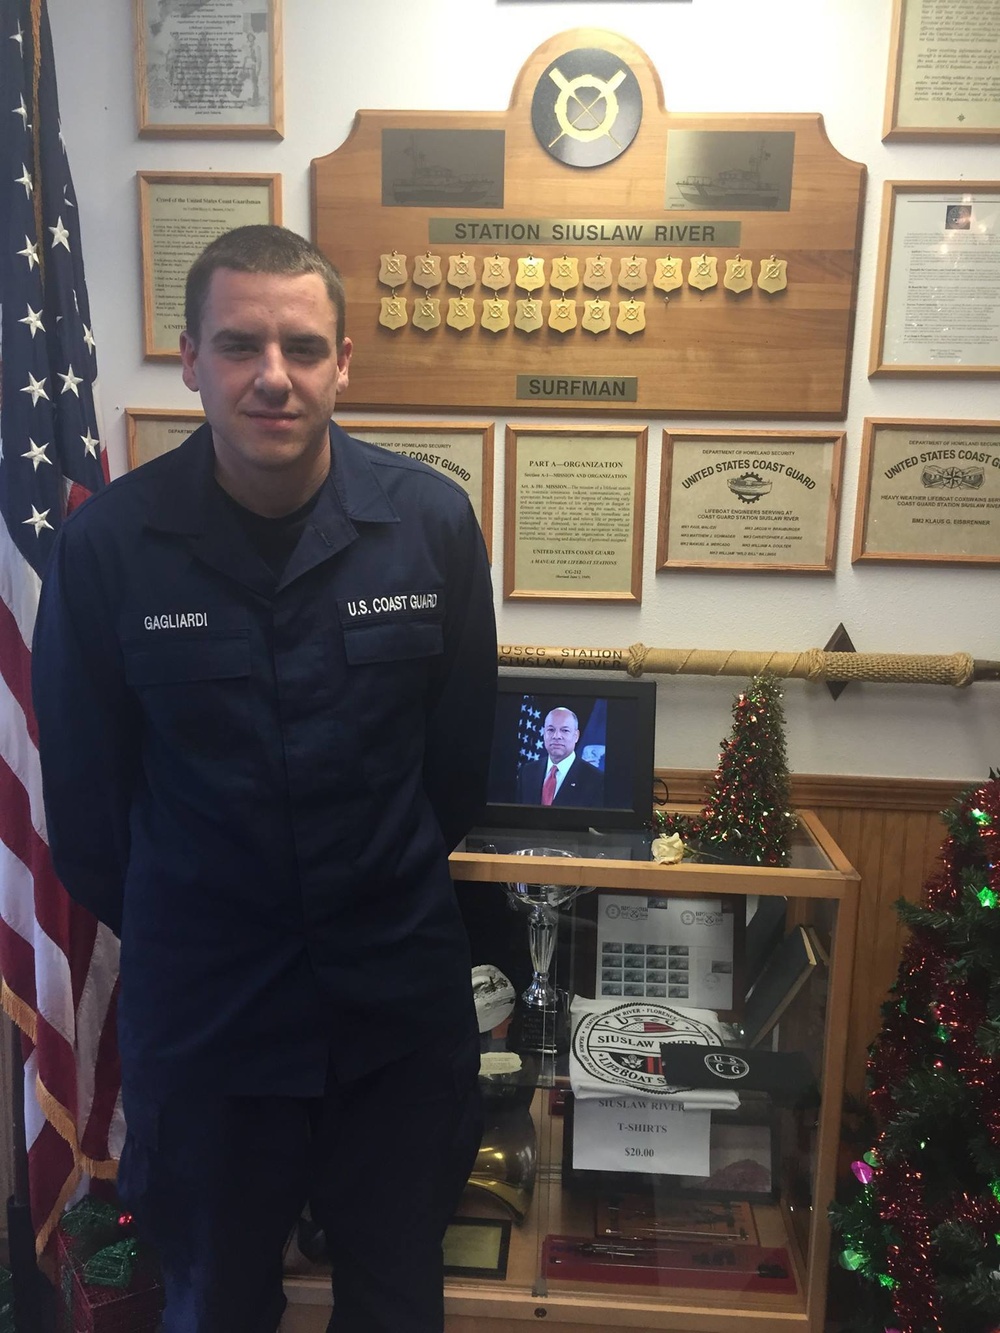 Off-duty Coast Guardsman rescues 2 children from surf near Siuslaw River, Ore.